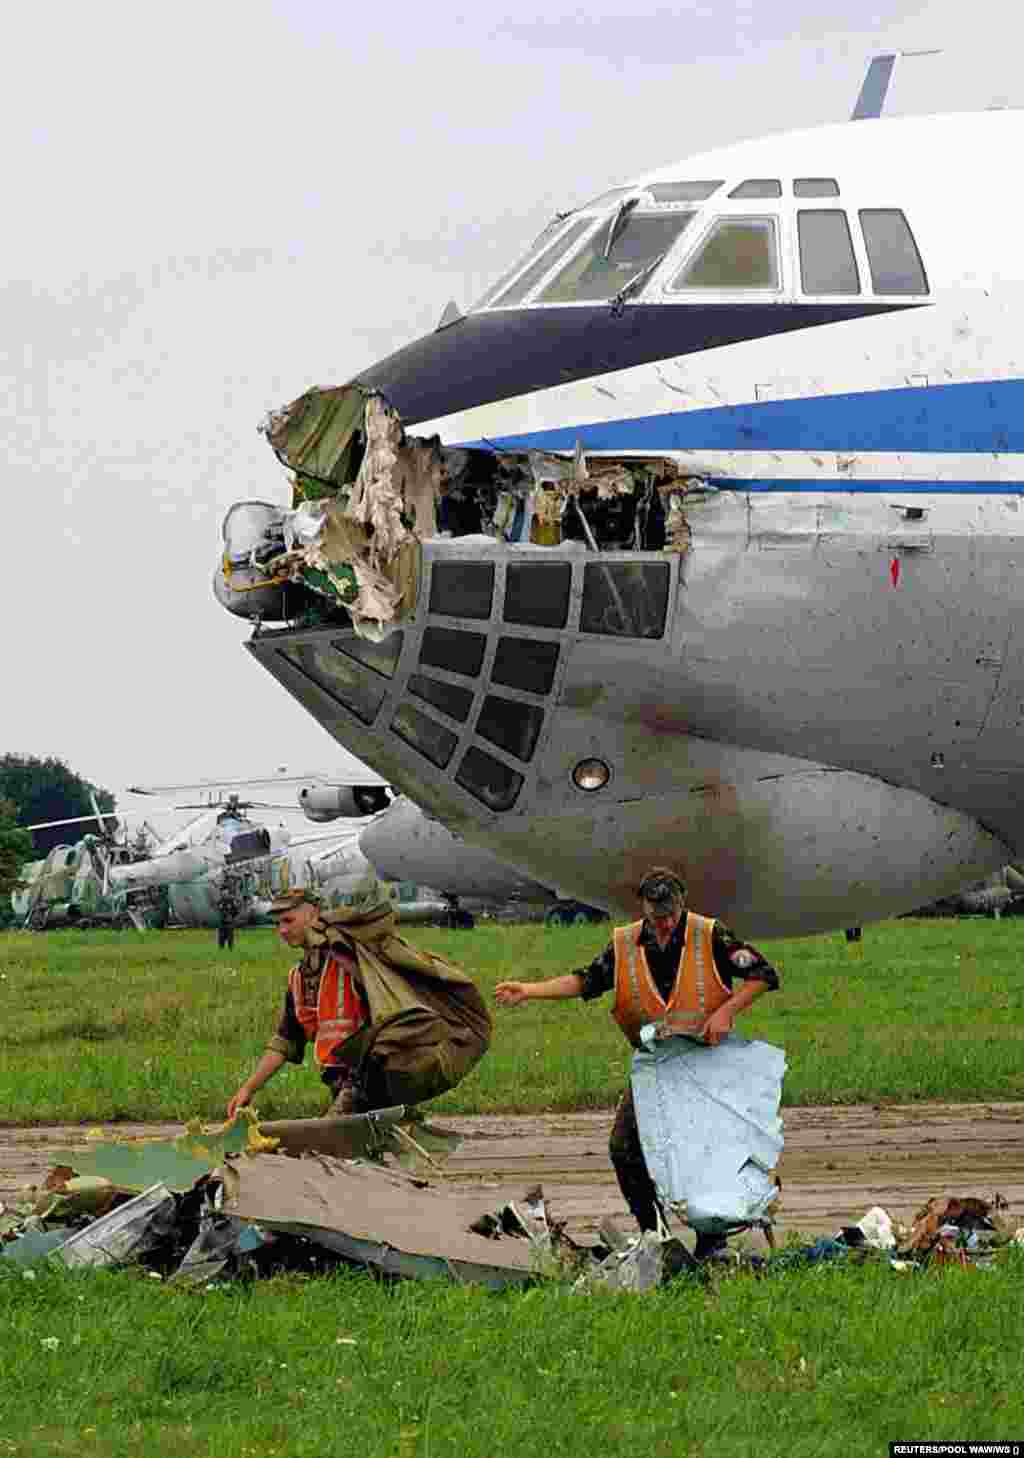 Rescue workers clear bodies and debris in front of the Ilyushin Il-76 transport aircraft that was struck by the left wing of the Su-27. The pilots stated that the flight map they had received differed from the actual layout of the airfield.